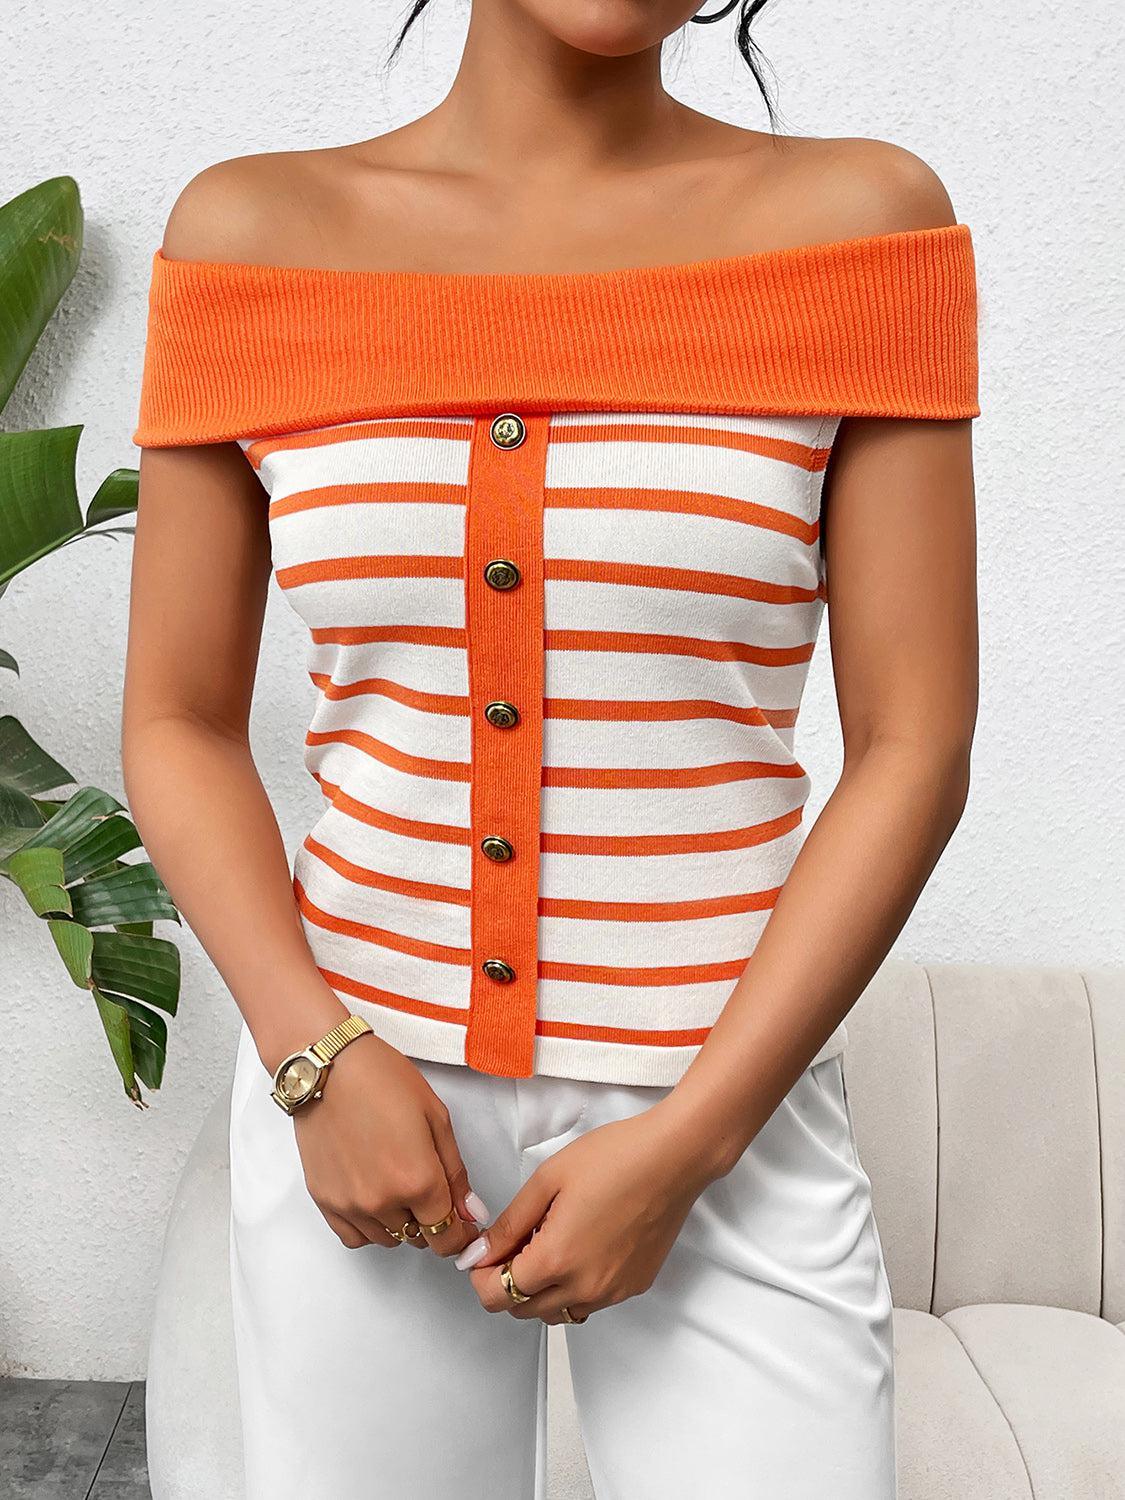 a woman in white pants and an orange striped top